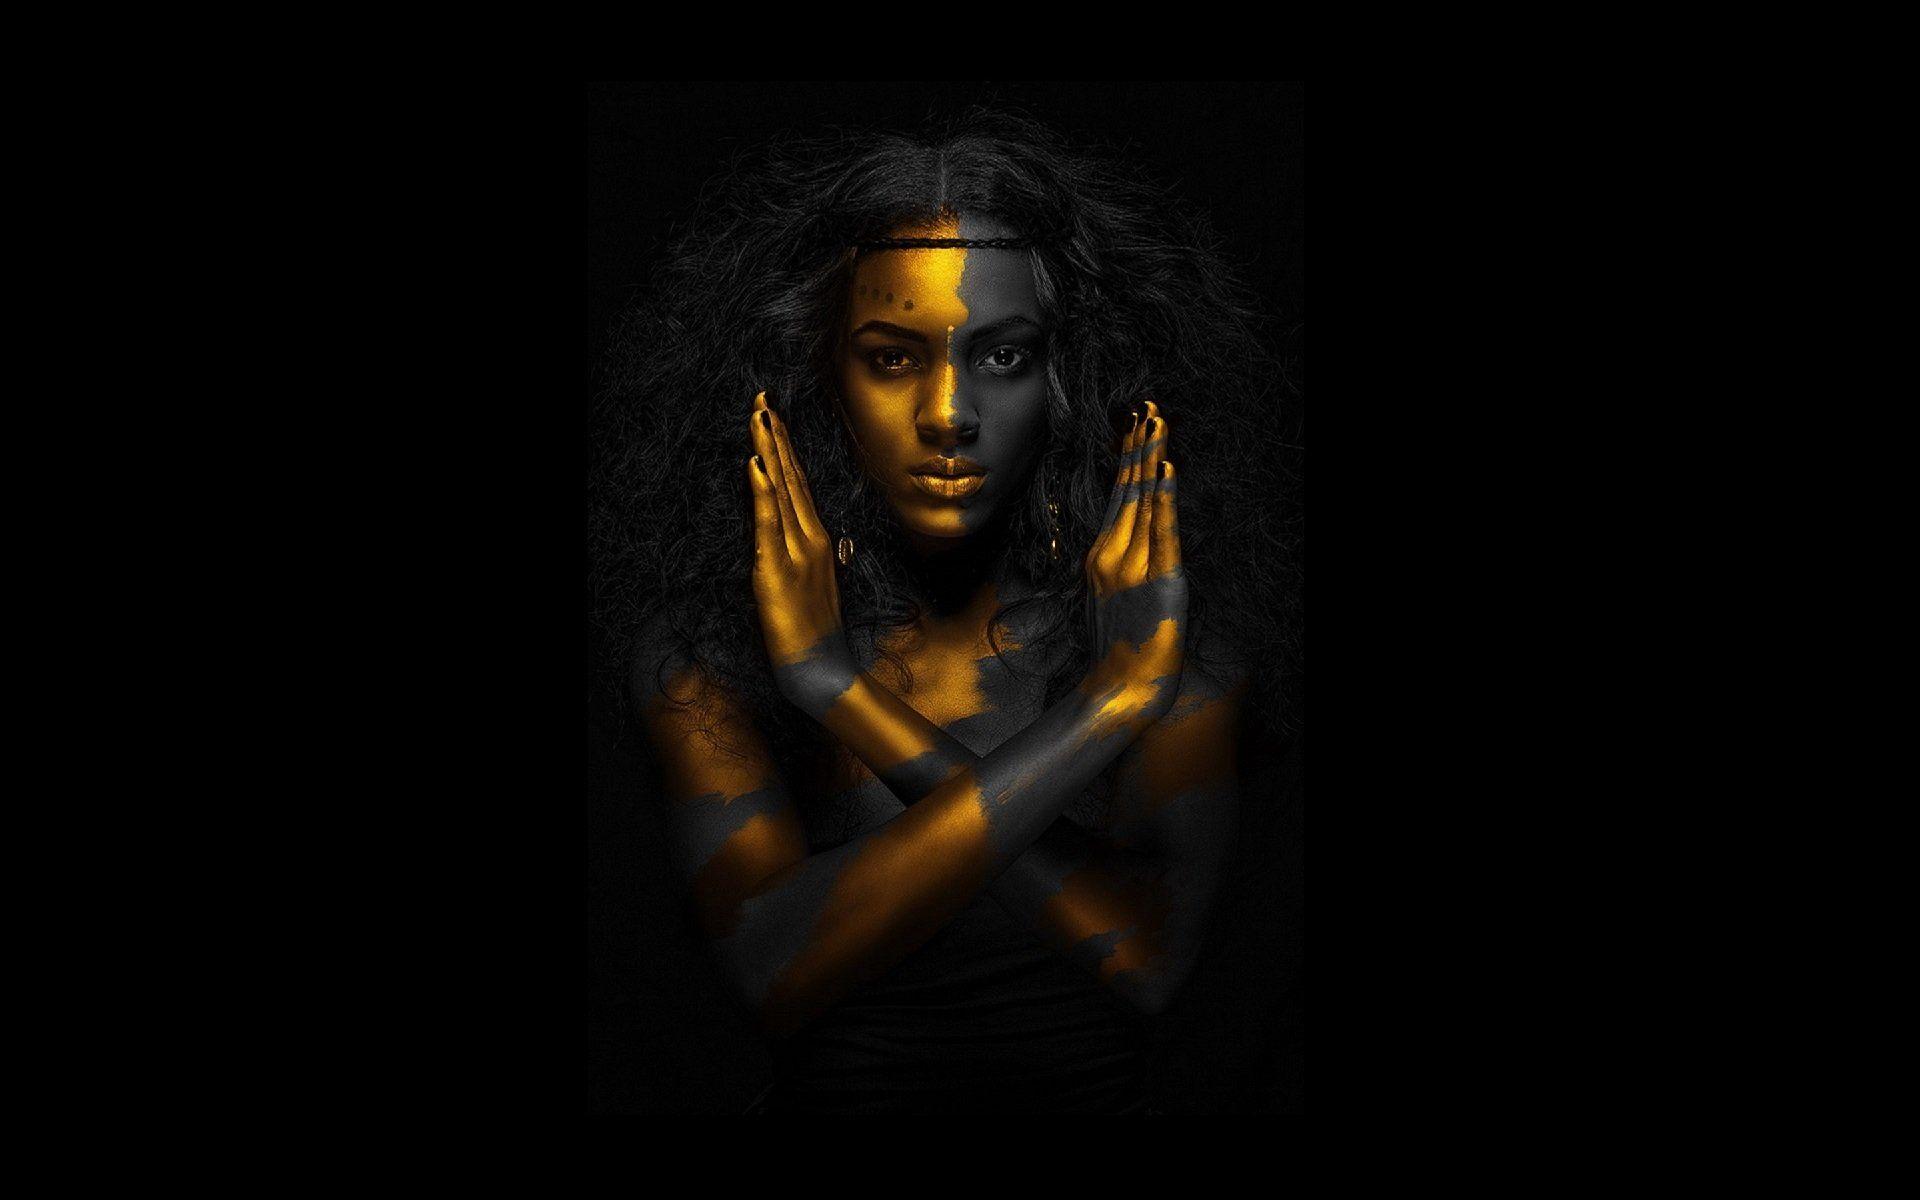 HD Wallpaper Black and Gold High Quality. Body painting, Body